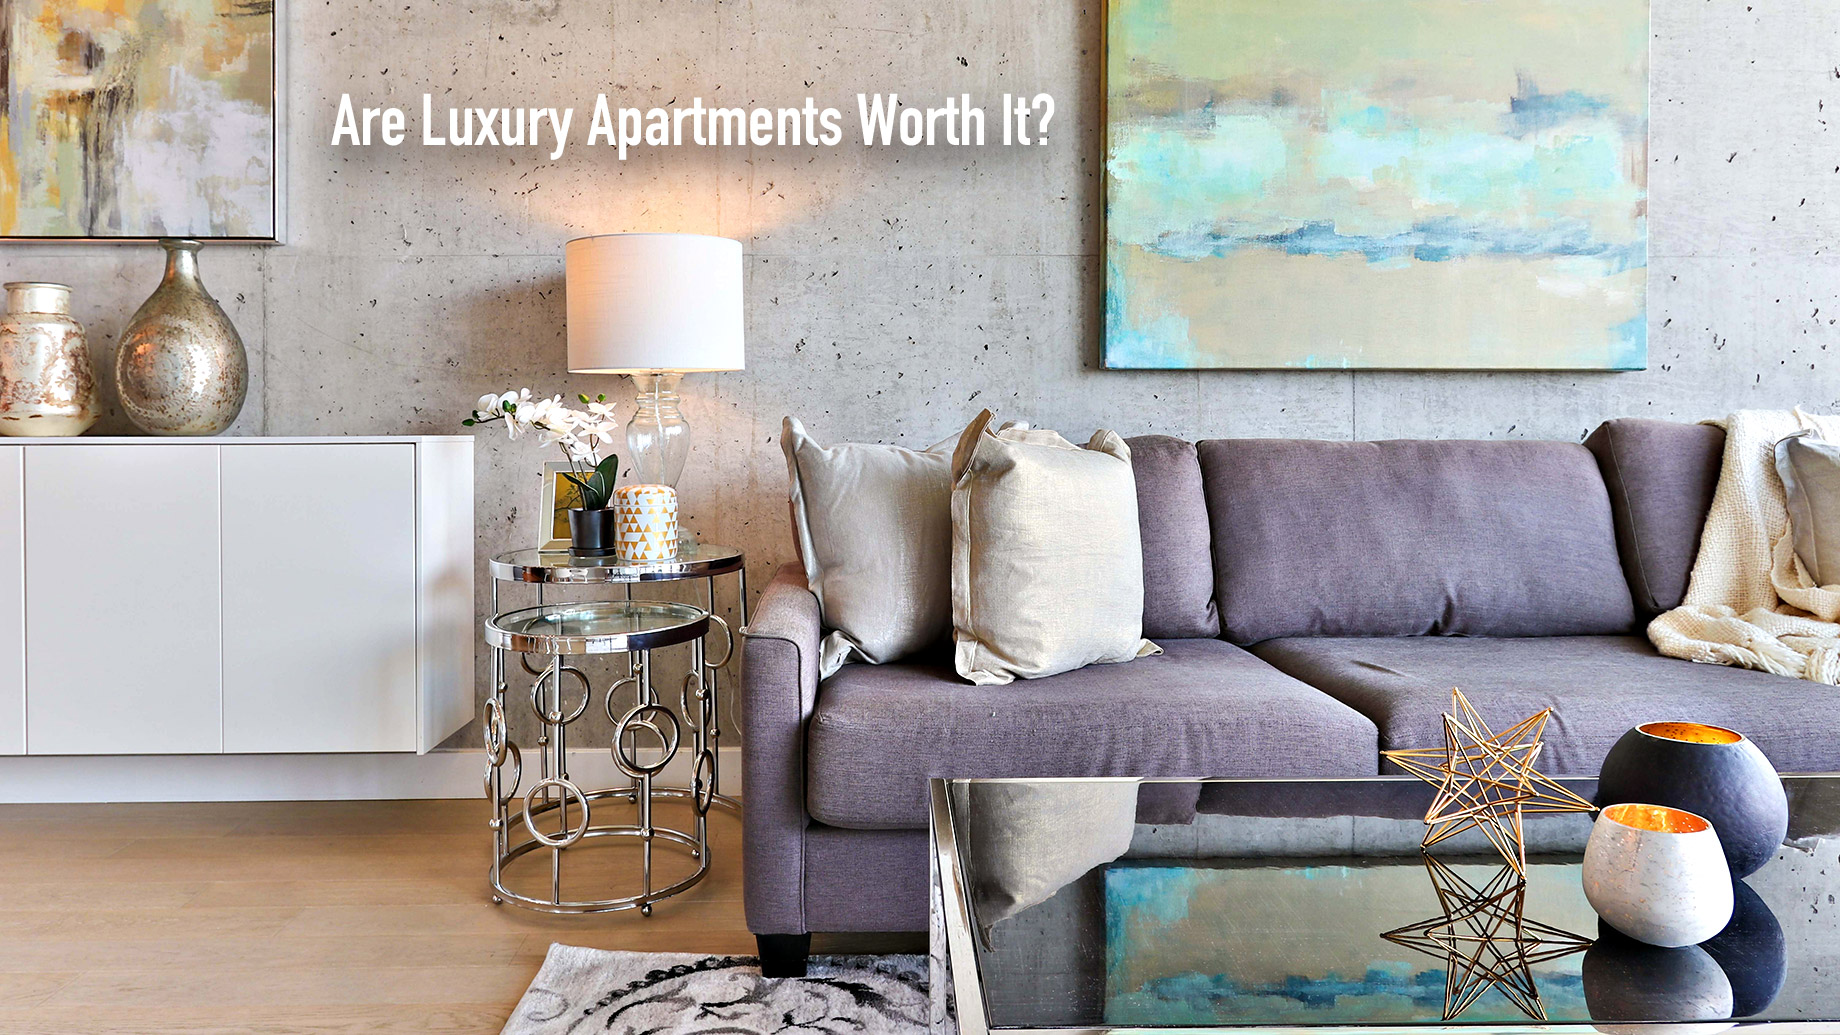 Luxury Apartments Hackensack - Are Luxury Apartments Worth It?